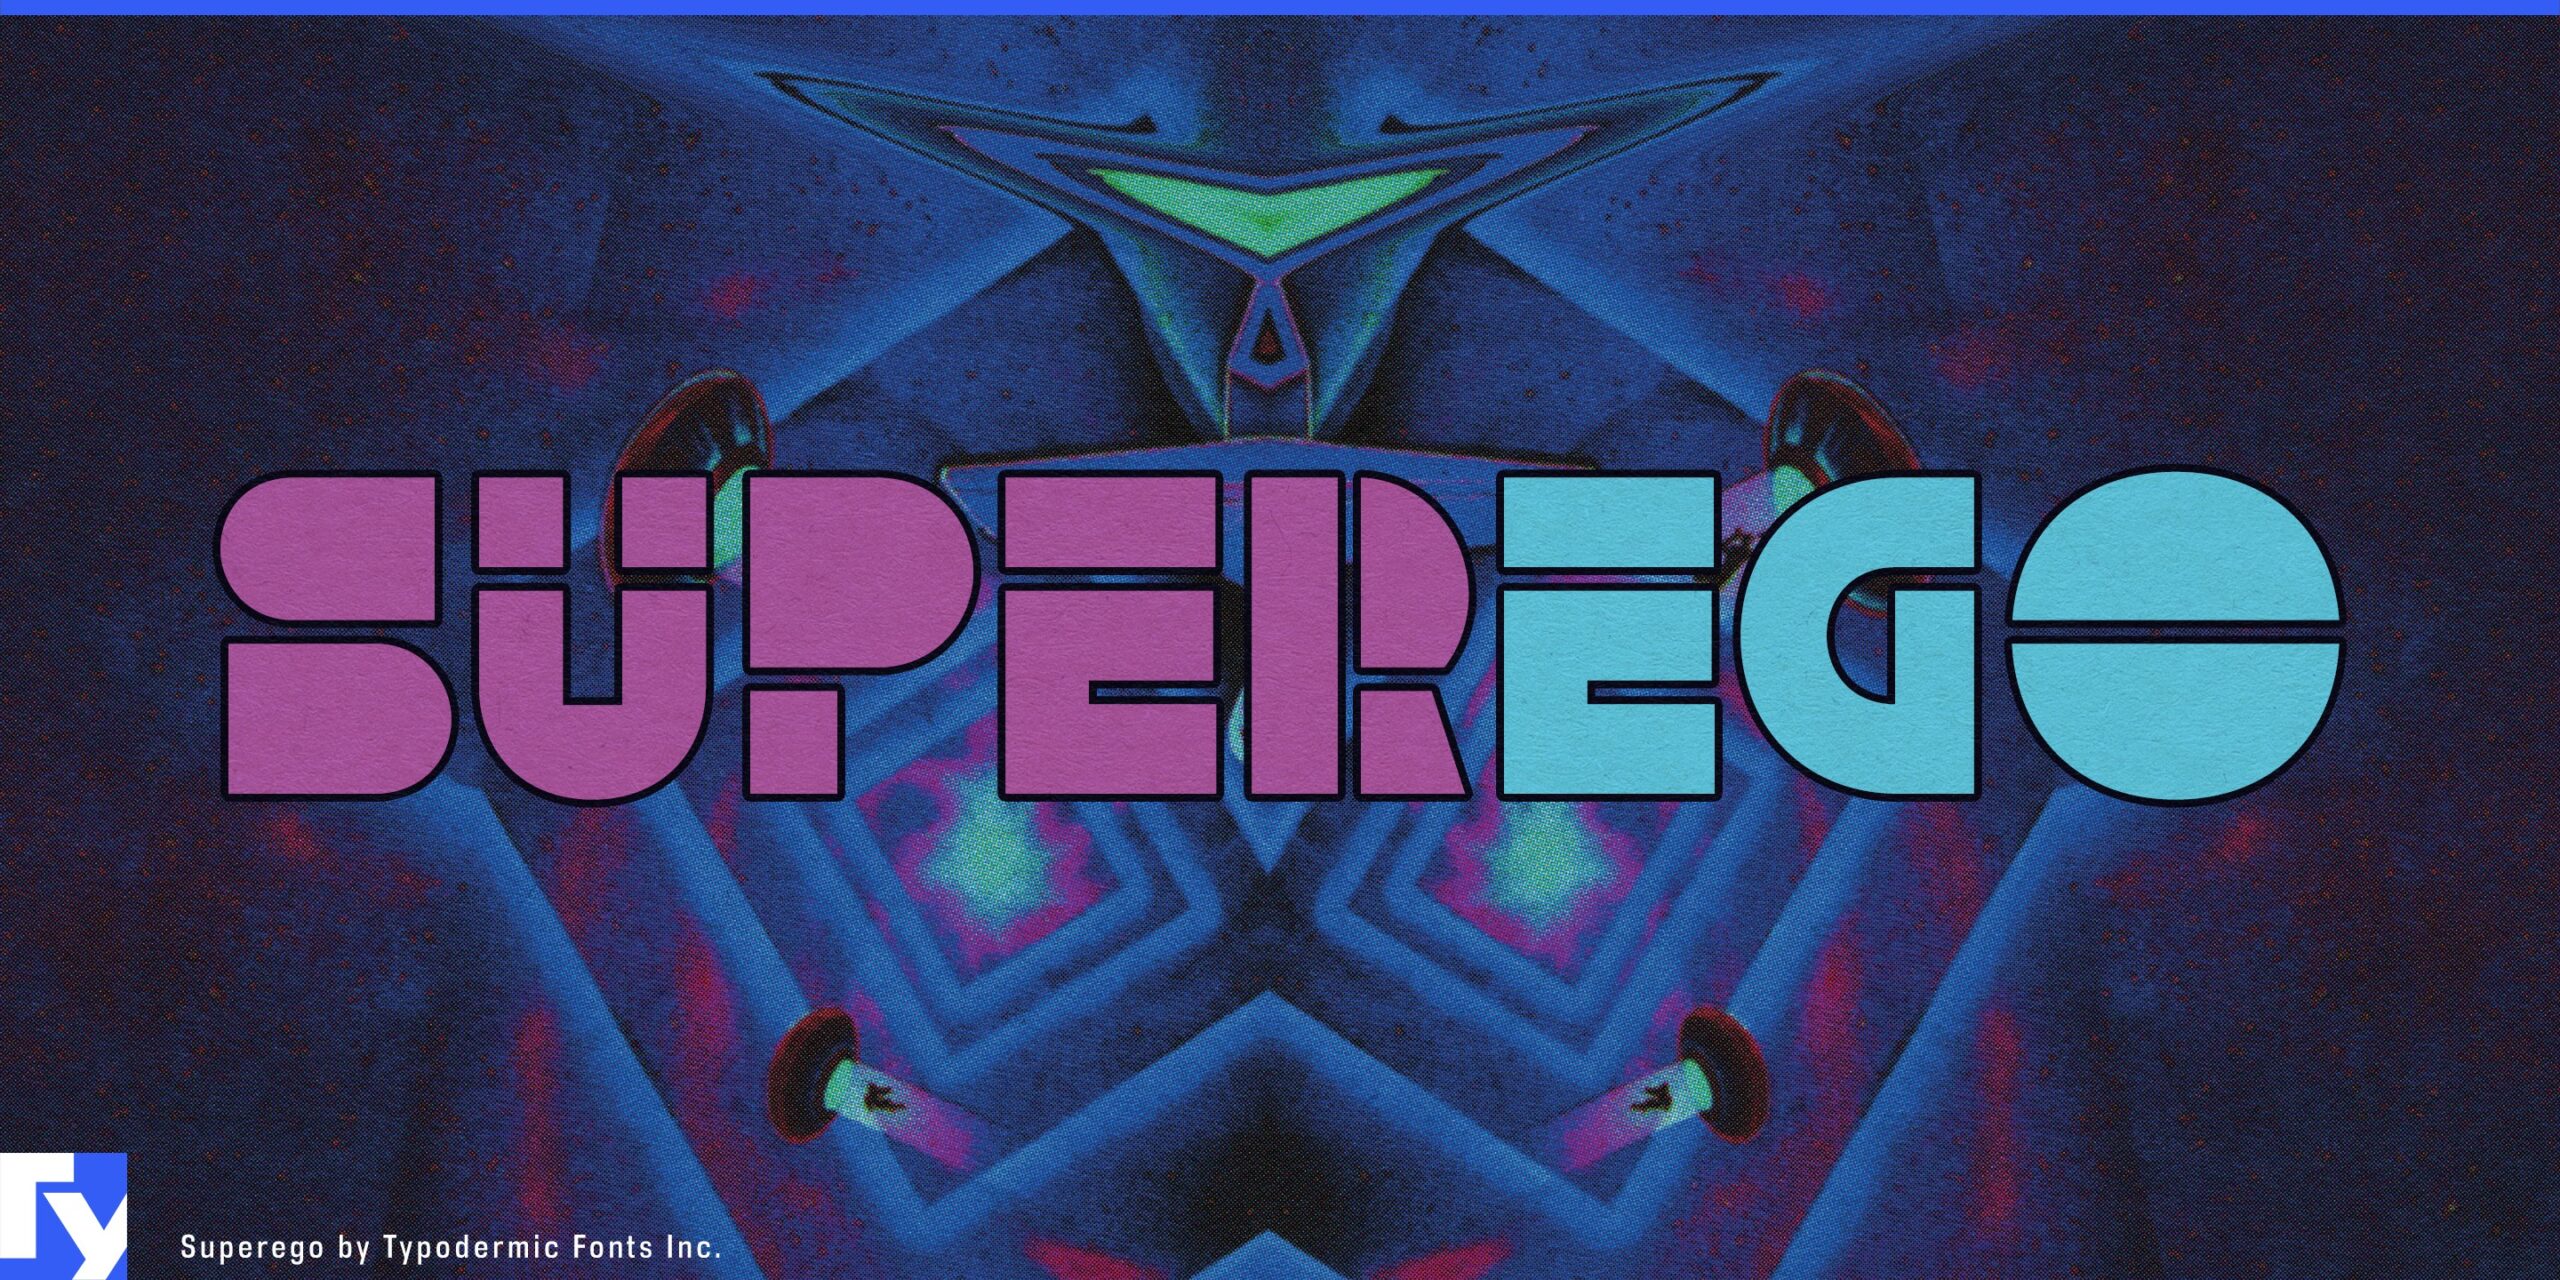 Let Superego bring a unique and unexpected edge to your designs.